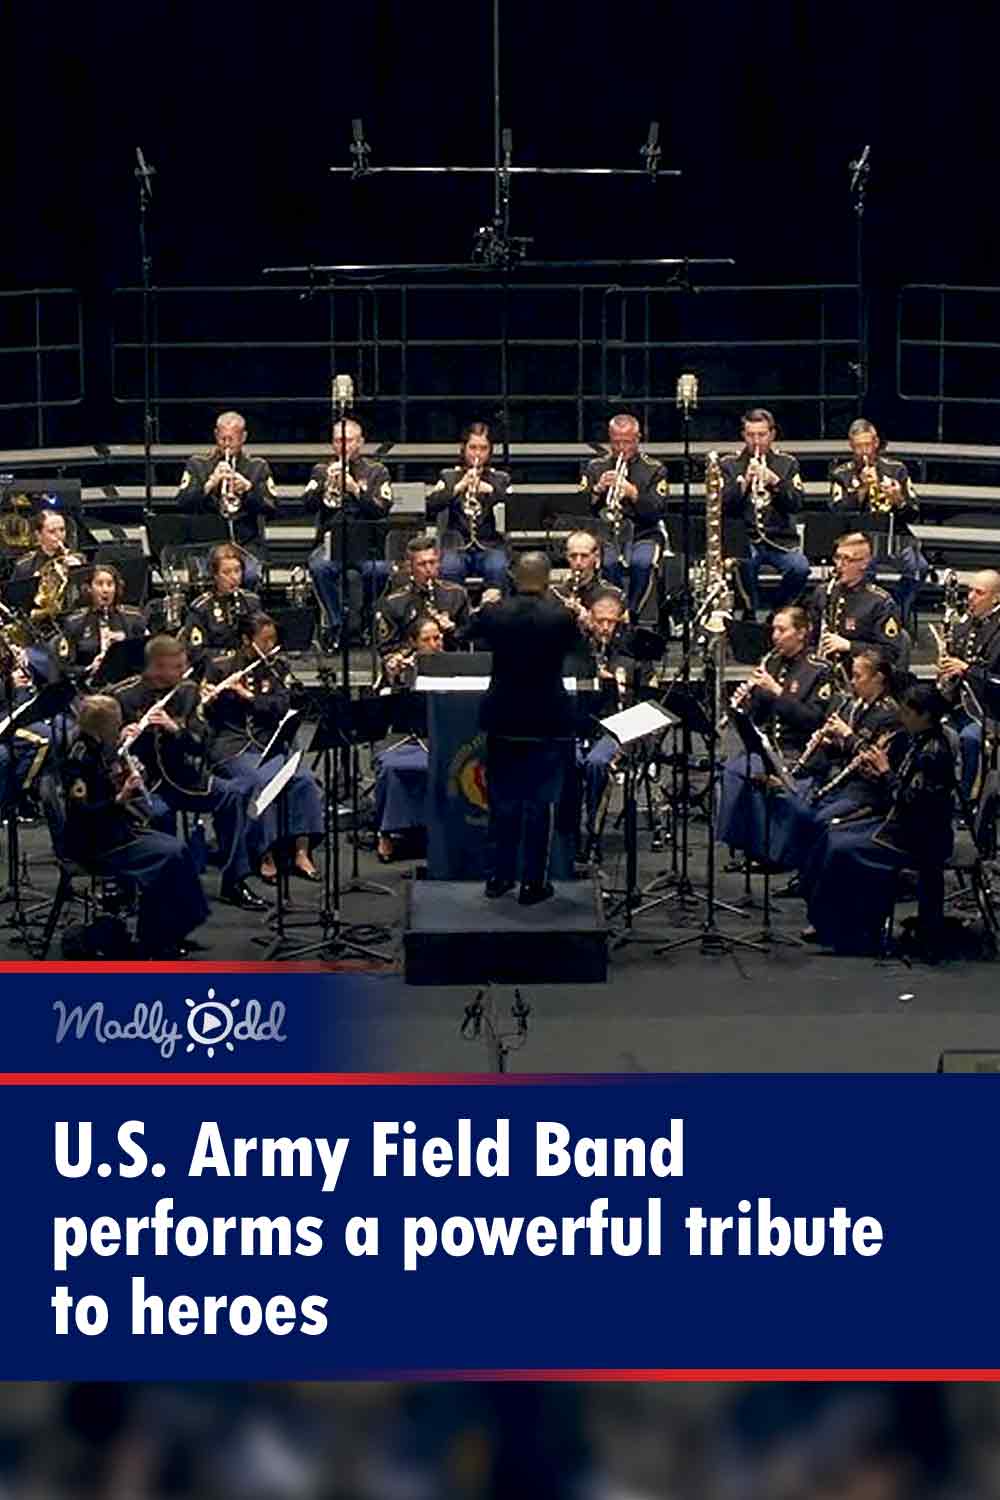 U.S. Army Field Band performs a powerful tribute to heroes